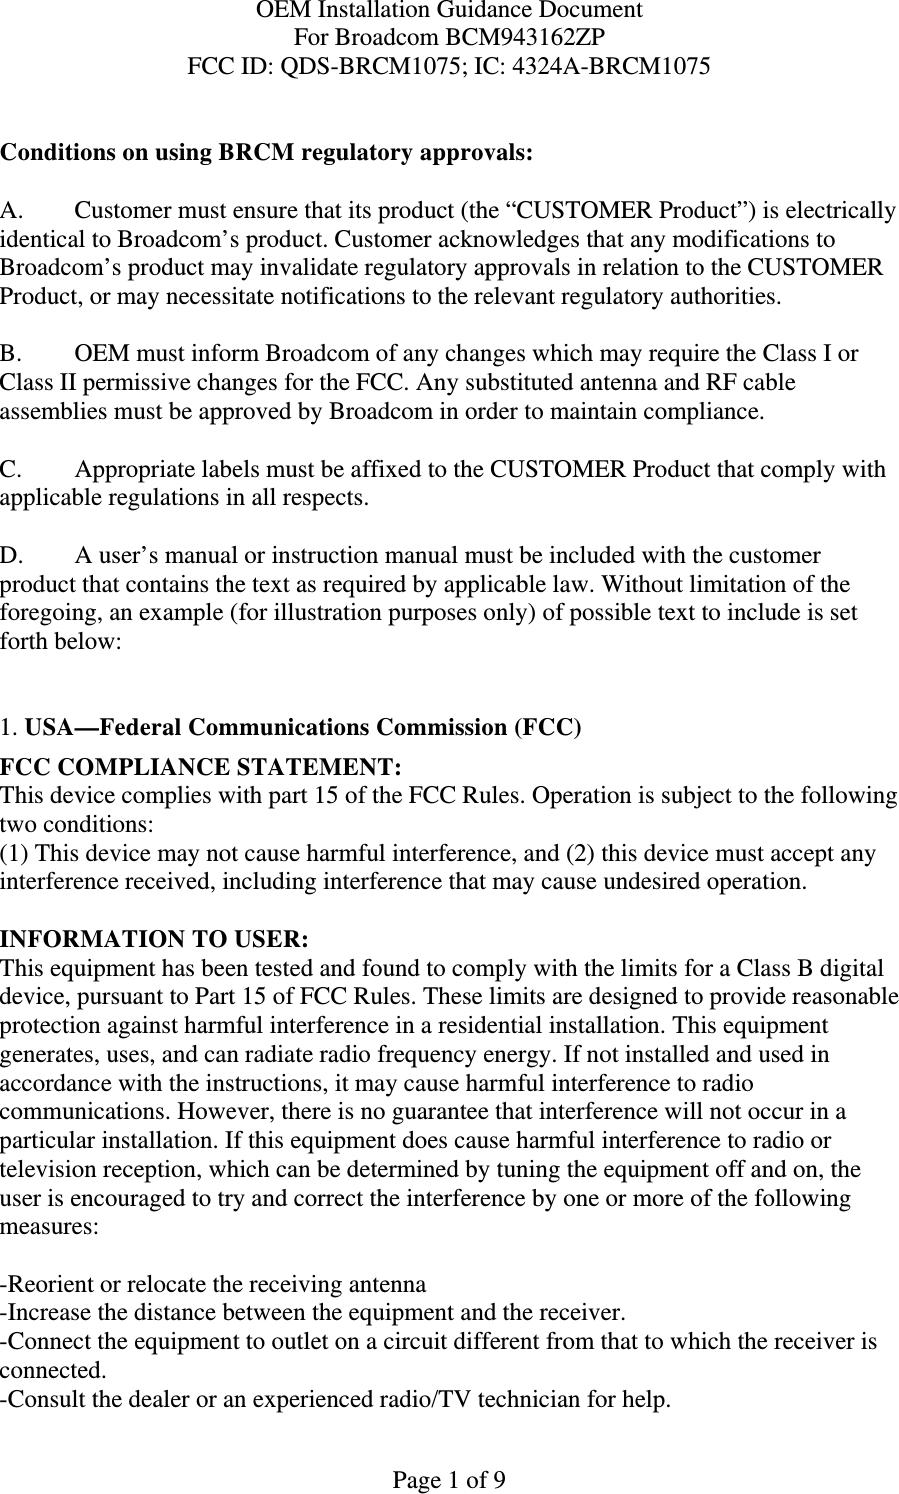 OEM Installation Guidance Document For Broadcom BCM943162ZP FCC ID: QDS-BRCM1075; IC: 4324A-BRCM1075  Page 1 of 9  Conditions on using BRCM regulatory approvals:   A.  Customer must ensure that its product (the “CUSTOMER Product”) is electrically identical to Broadcom’s product. Customer acknowledges that any modifications to Broadcom’s product may invalidate regulatory approvals in relation to the CUSTOMER Product, or may necessitate notifications to the relevant regulatory authorities.   B.   OEM must inform Broadcom of any changes which may require the Class I or Class II permissive changes for the FCC. Any substituted antenna and RF cable assemblies must be approved by Broadcom in order to maintain compliance.  C.  Appropriate labels must be affixed to the CUSTOMER Product that comply with  applicable regulations in all respects.    D.   A user’s manual or instruction manual must be included with the customer product that contains the text as required by applicable law. Without limitation of the foregoing, an example (for illustration purposes only) of possible text to include is set forth below:    1. USA—Federal Communications Commission (FCC) FCC COMPLIANCE STATEMENT: This device complies with part 15 of the FCC Rules. Operation is subject to the following two conditions: (1) This device may not cause harmful interference, and (2) this device must accept any interference received, including interference that may cause undesired operation.  INFORMATION TO USER: This equipment has been tested and found to comply with the limits for a Class B digital device, pursuant to Part 15 of FCC Rules. These limits are designed to provide reasonable protection against harmful interference in a residential installation. This equipment generates, uses, and can radiate radio frequency energy. If not installed and used in accordance with the instructions, it may cause harmful interference to radio communications. However, there is no guarantee that interference will not occur in a particular installation. If this equipment does cause harmful interference to radio or television reception, which can be determined by tuning the equipment off and on, the user is encouraged to try and correct the interference by one or more of the following measures:   -Reorient or relocate the receiving antenna -Increase the distance between the equipment and the receiver. -Connect the equipment to outlet on a circuit different from that to which the receiver is connected. -Consult the dealer or an experienced radio/TV technician for help. 